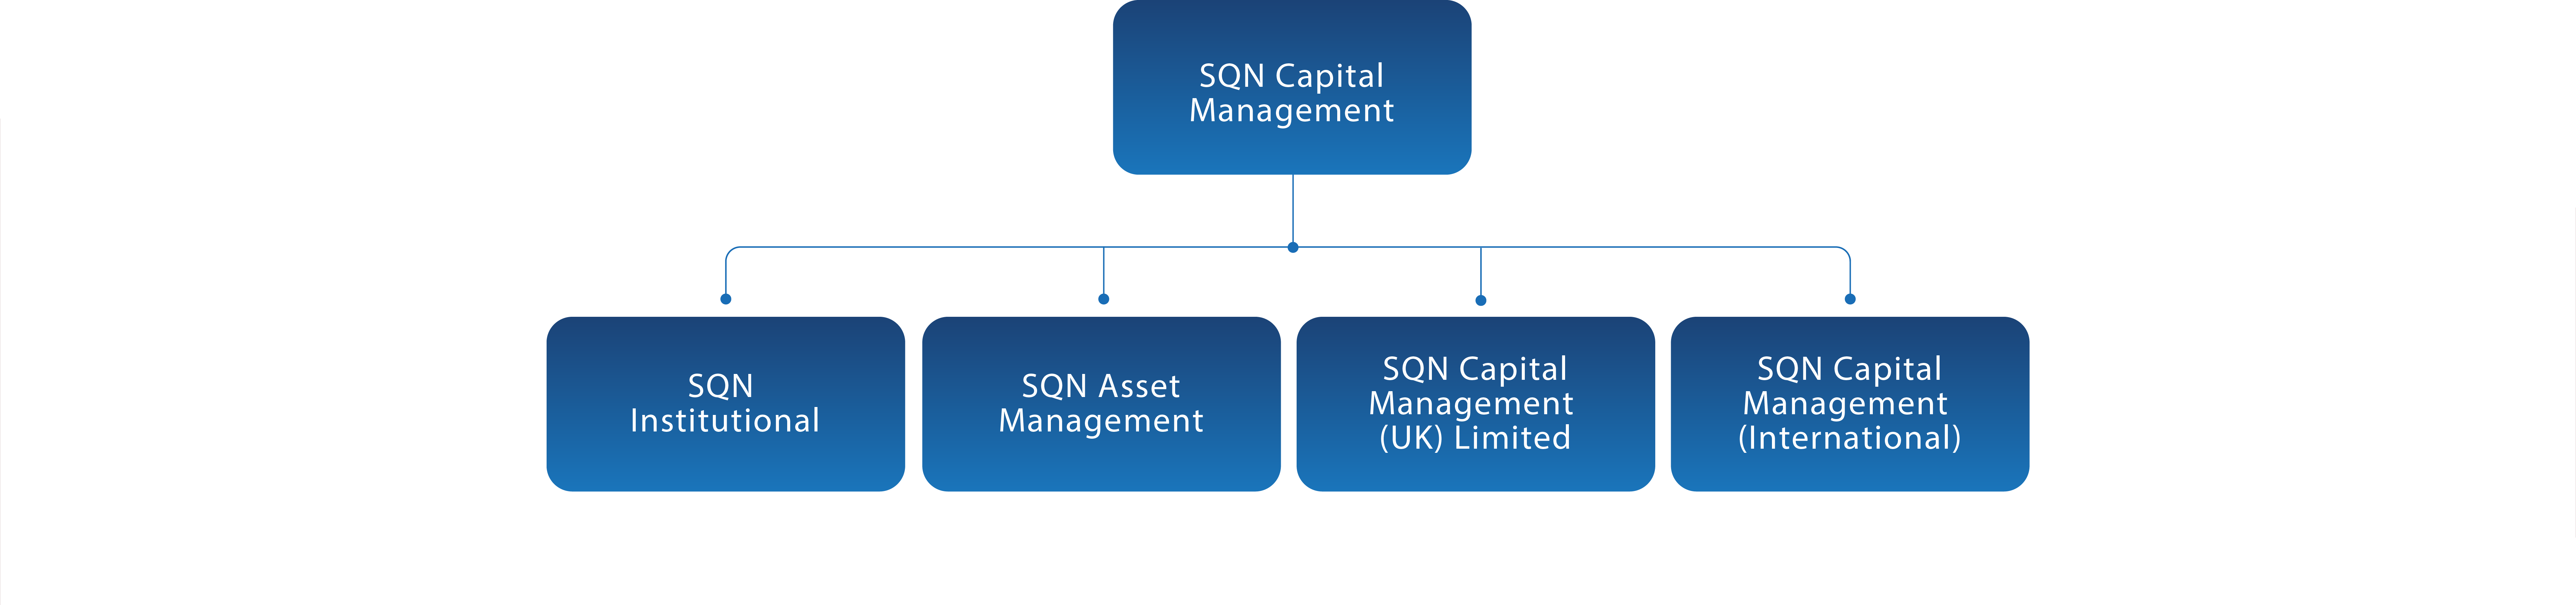 //www.sqncapital.com/wp-content/uploads/2017/07/Our-managers-chart-2-4.png